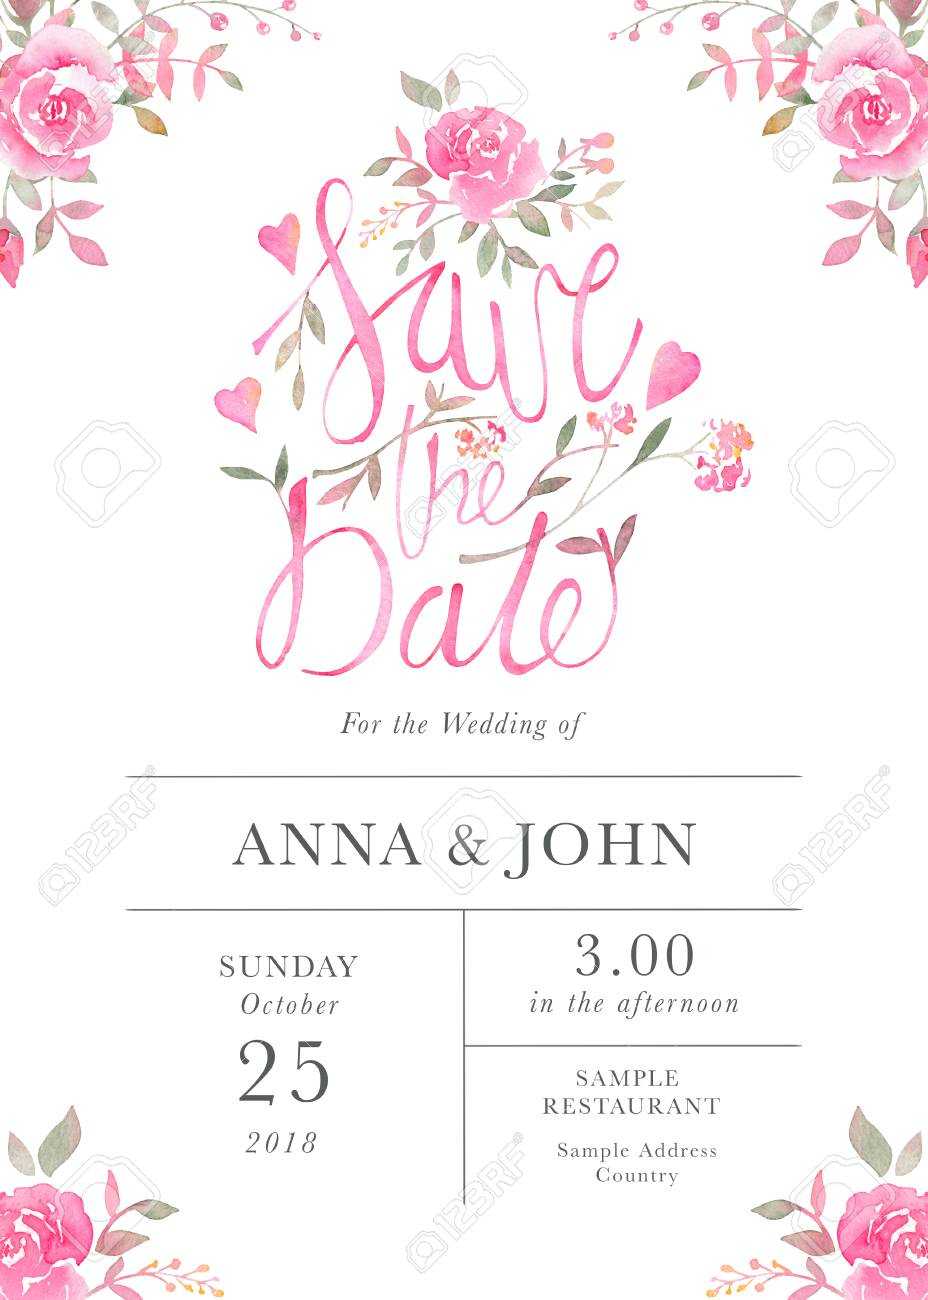 Wedding Invitation Card Template With Watercolor Rose Flowers With Sample Wedding Invitation Cards Templates